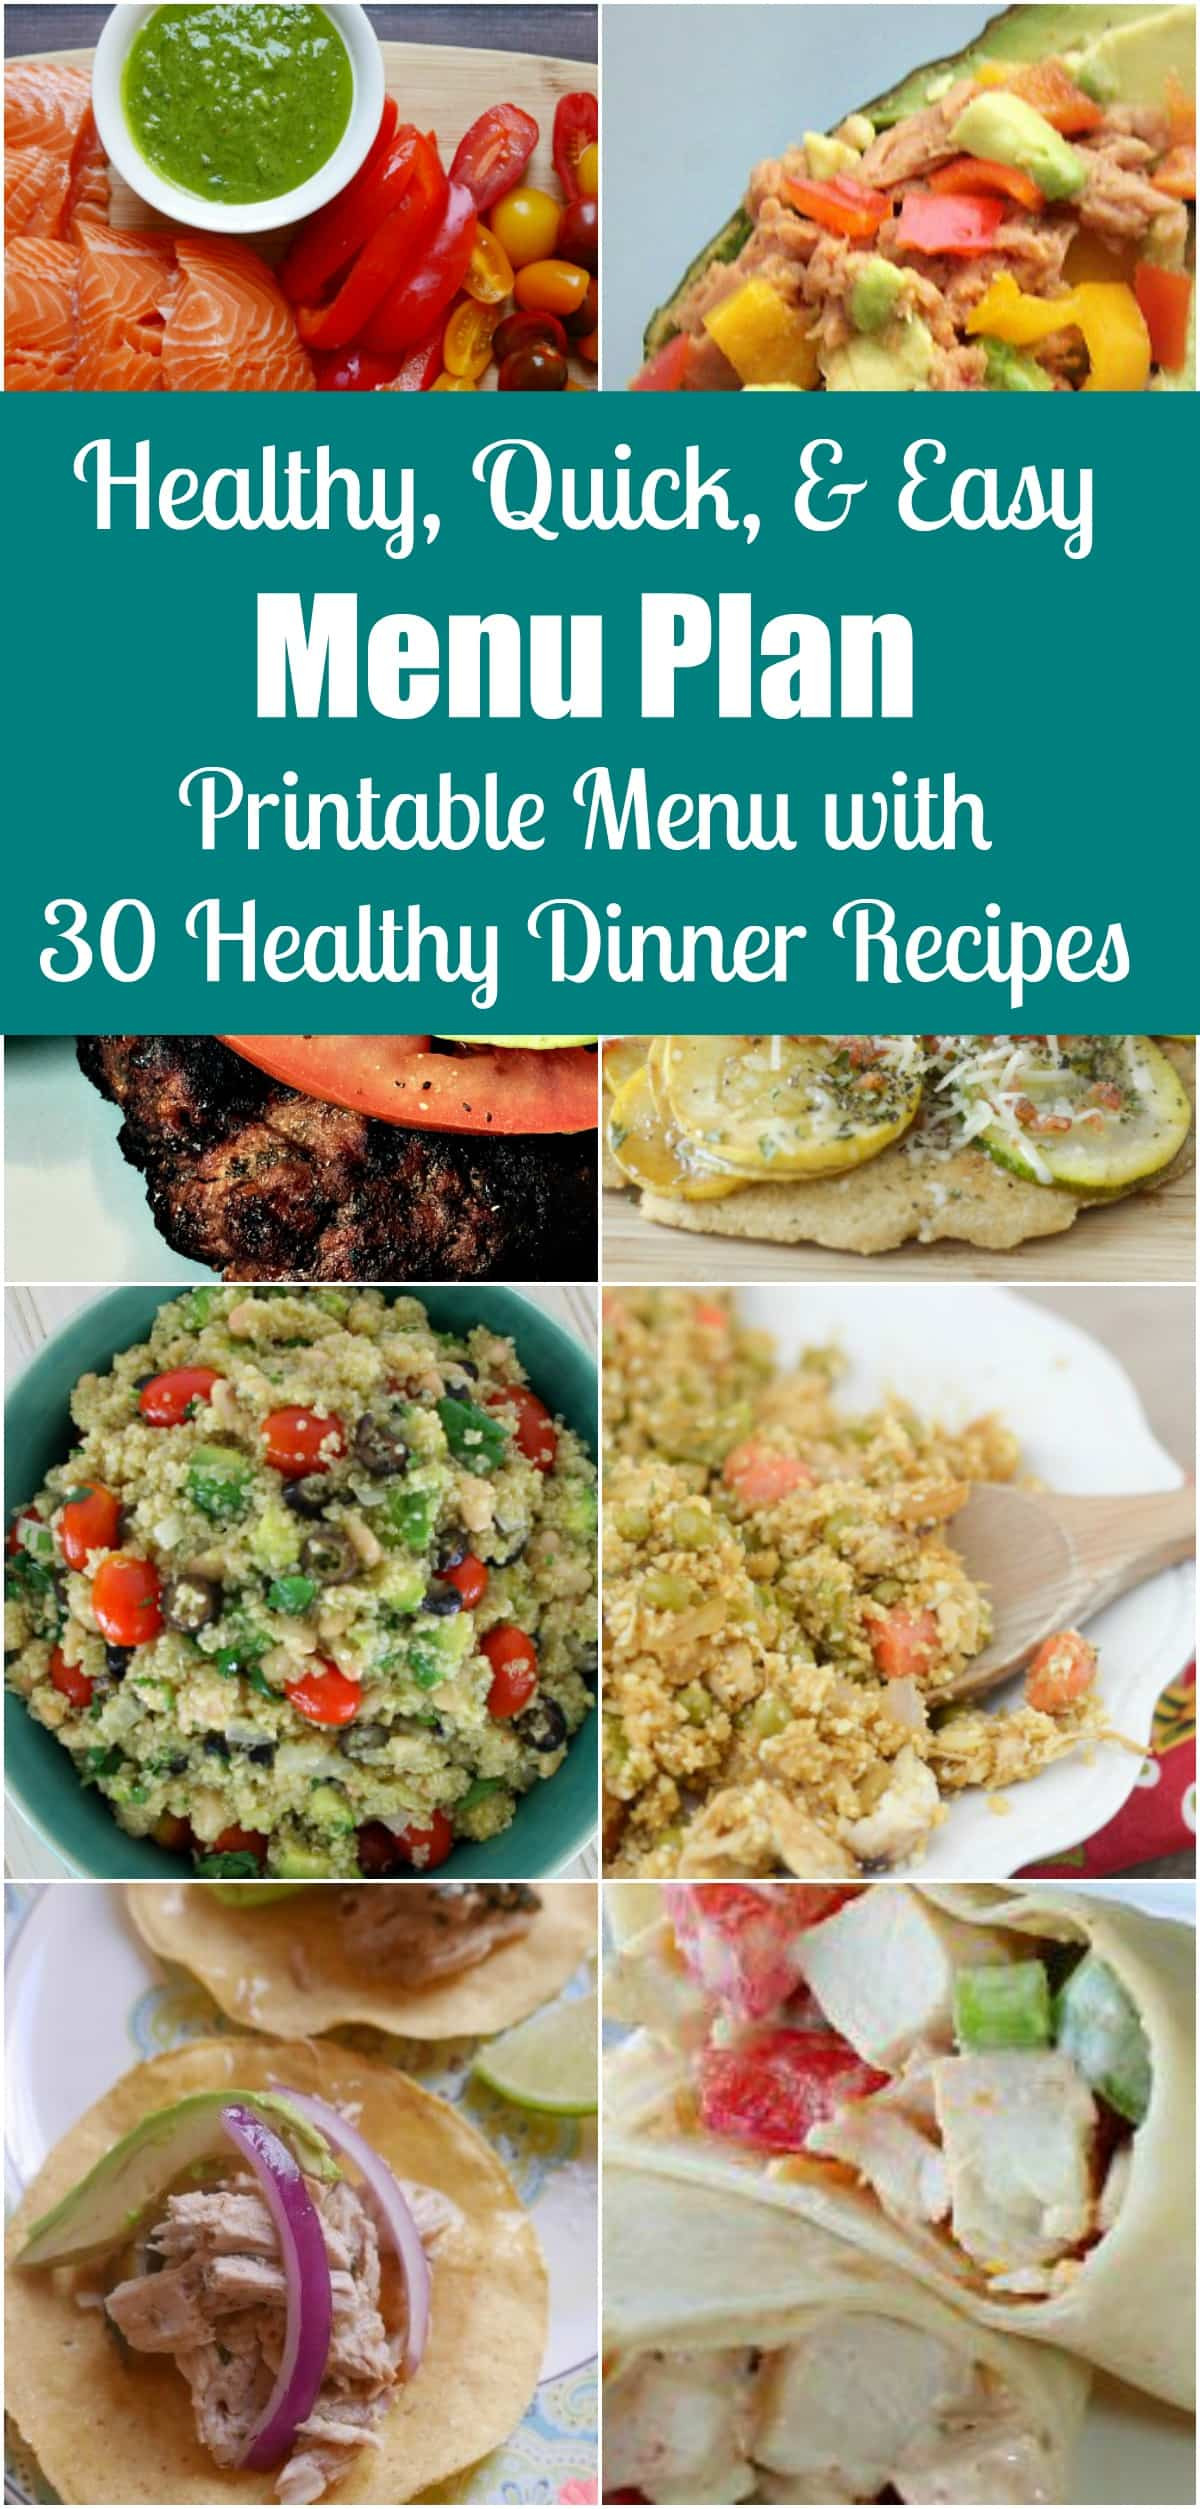 Quick And Easy Healthy Dinner Recipes
 Quick Easy & Healthy Dinner Menu Plan 30 Simple Recipes